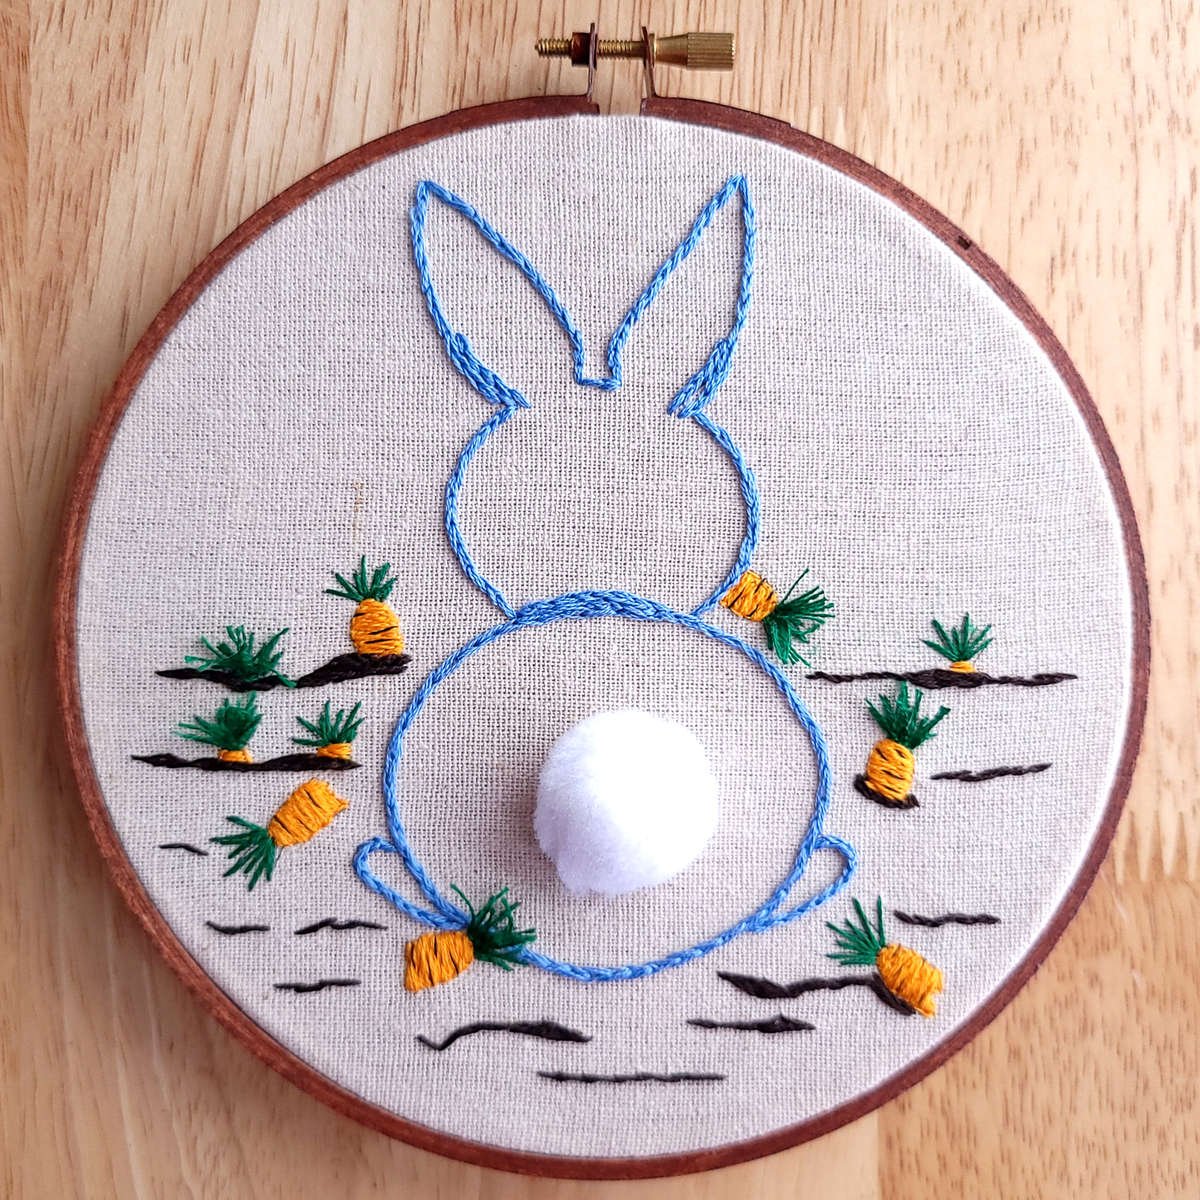 Displaying Hand Embroidery in the Hoop